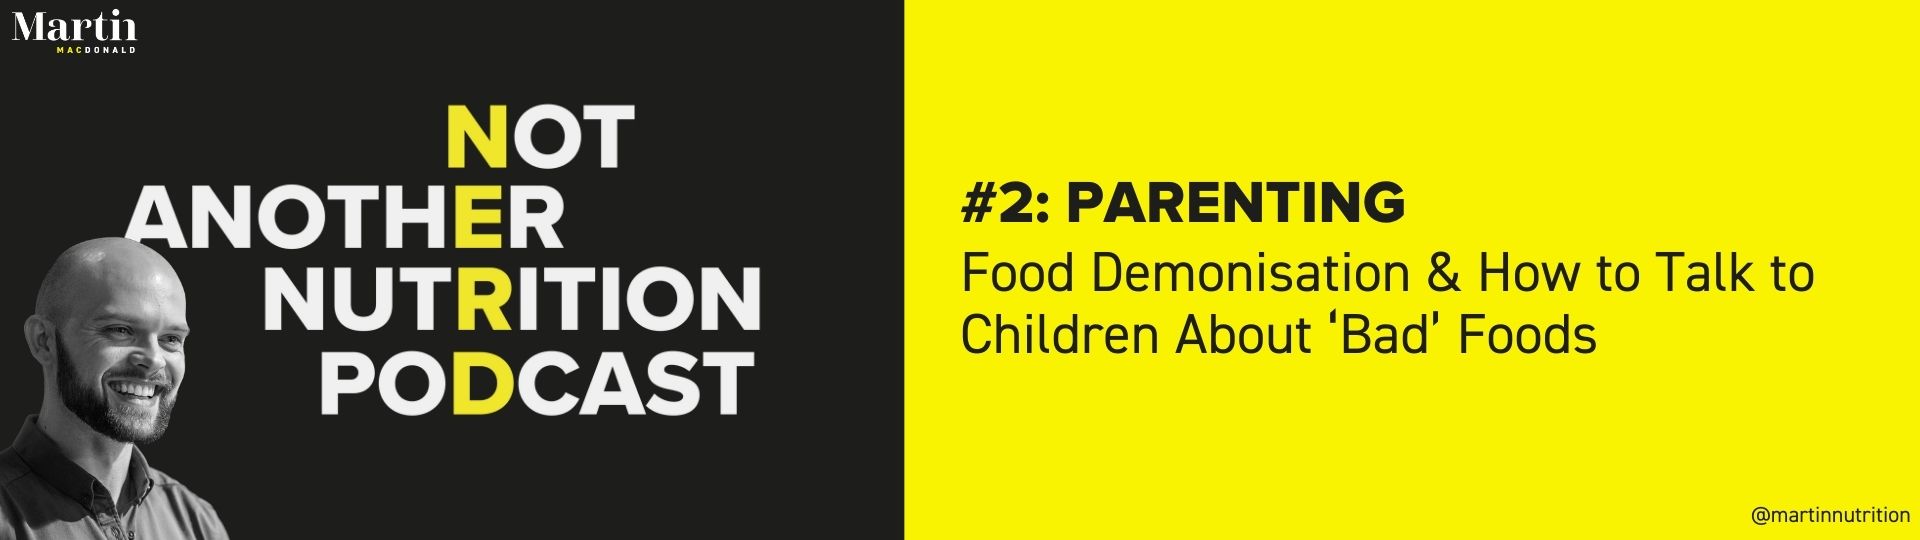 Food Demonisation & How to Talk to Children About 'Bad' Foods